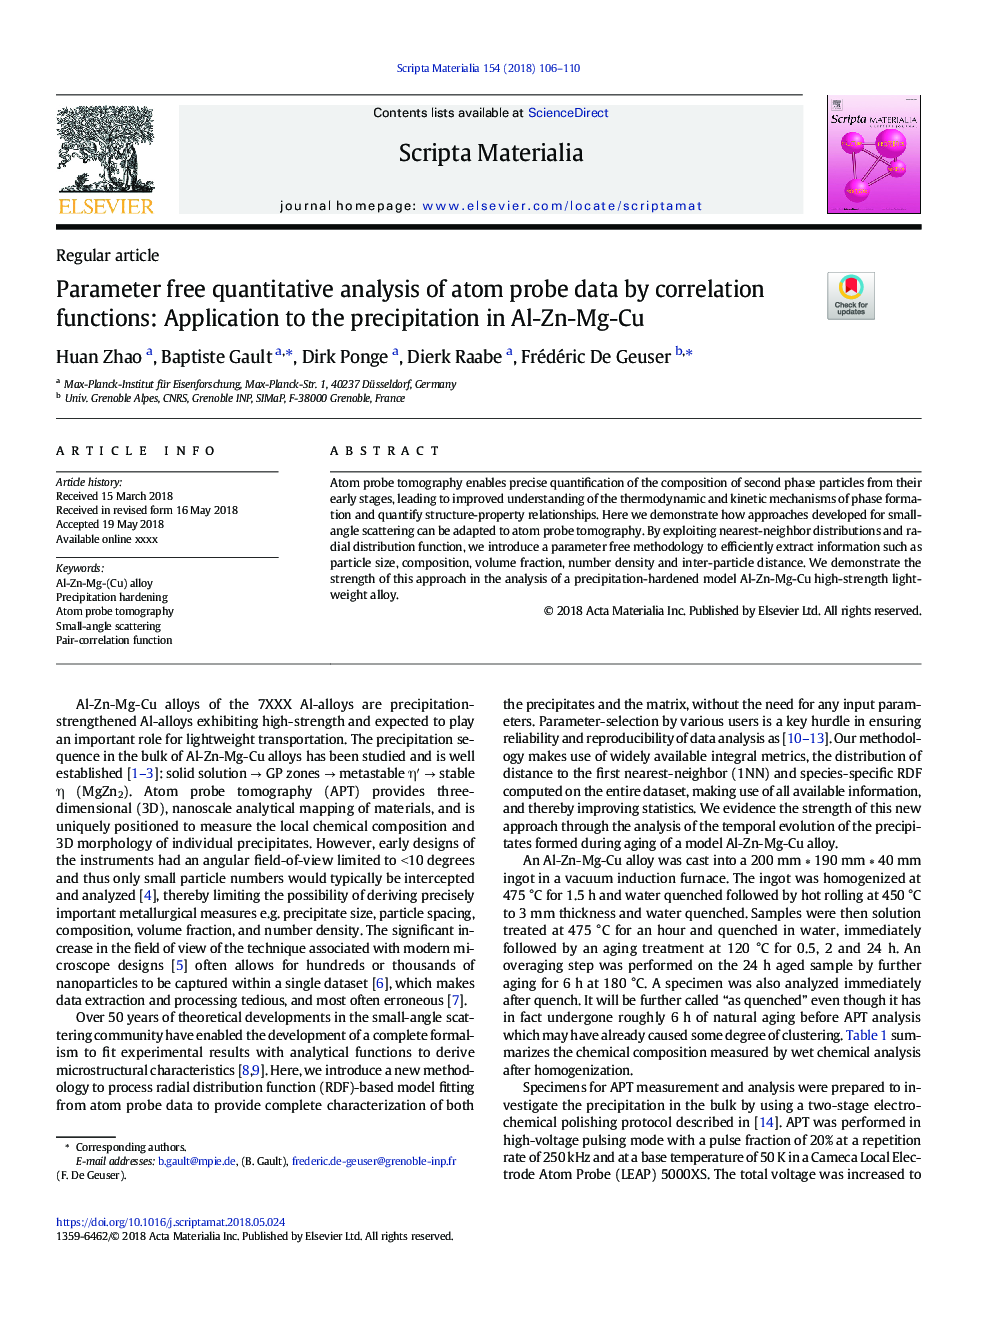 Parameter free quantitative analysis of atom probe data by correlation functions: Application to the precipitation in Al-Zn-Mg-Cu